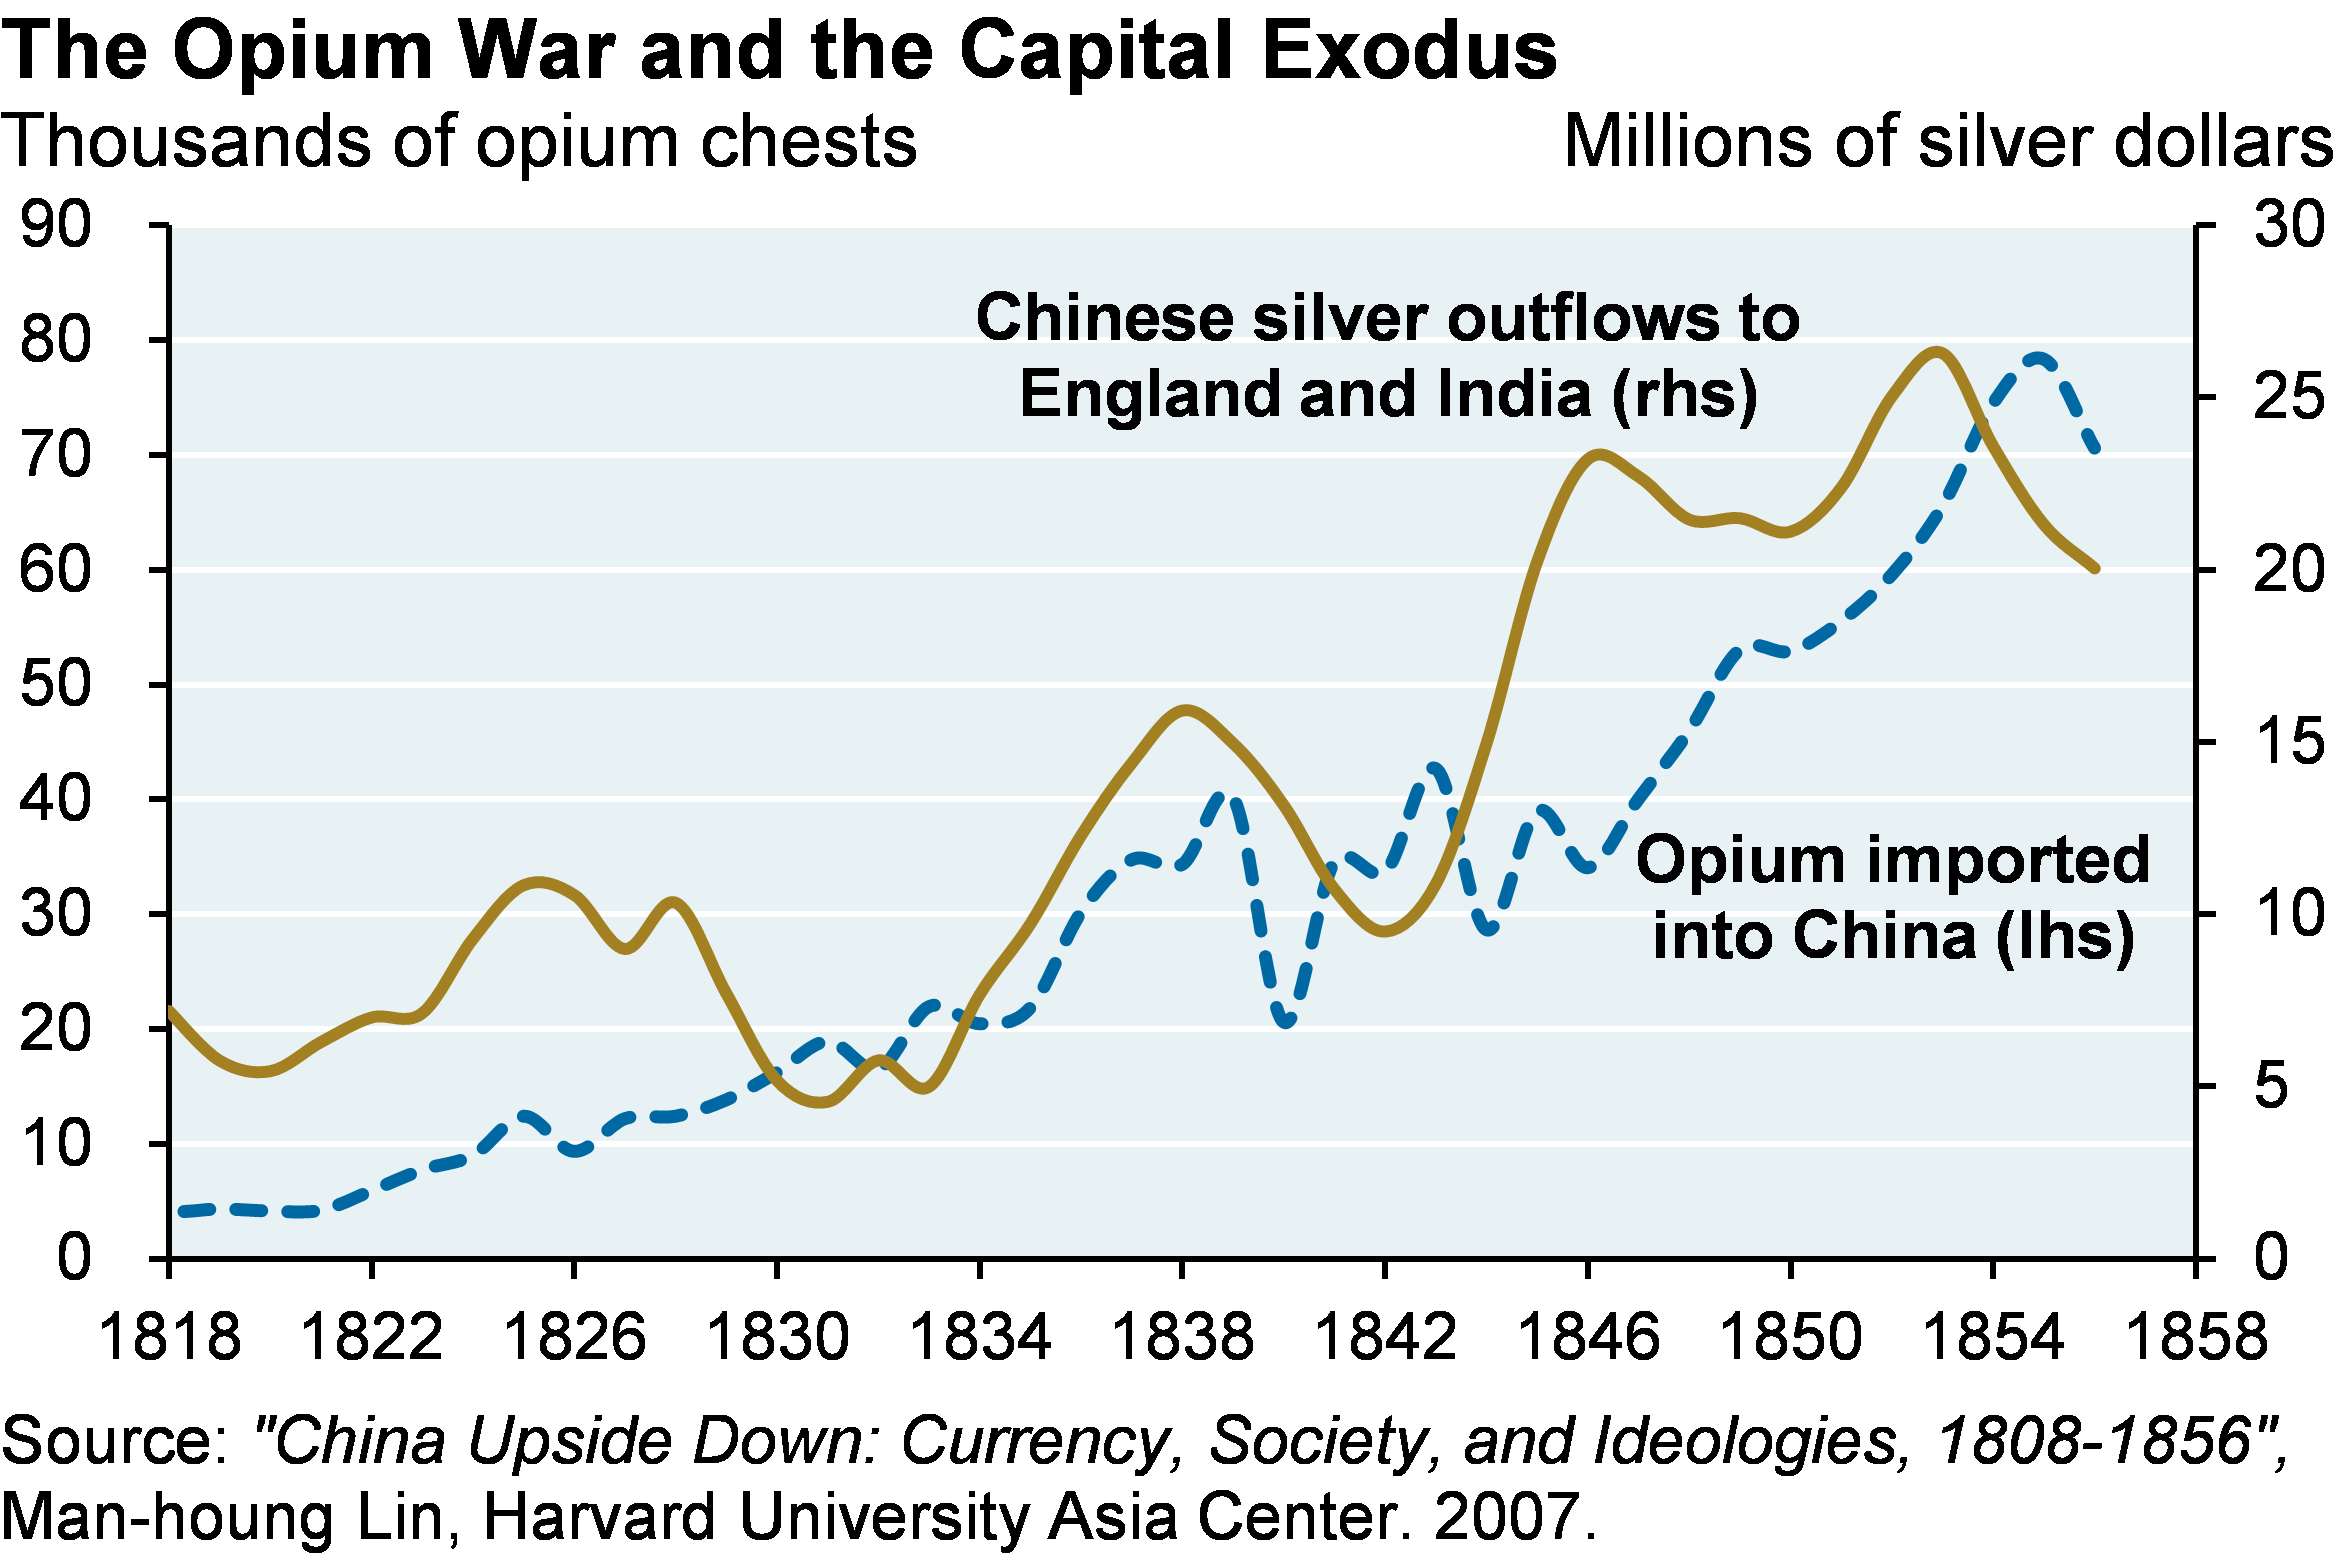 Line chart which shows opium chests imported into China and silver outflows to England and India from 1818 to 1858.